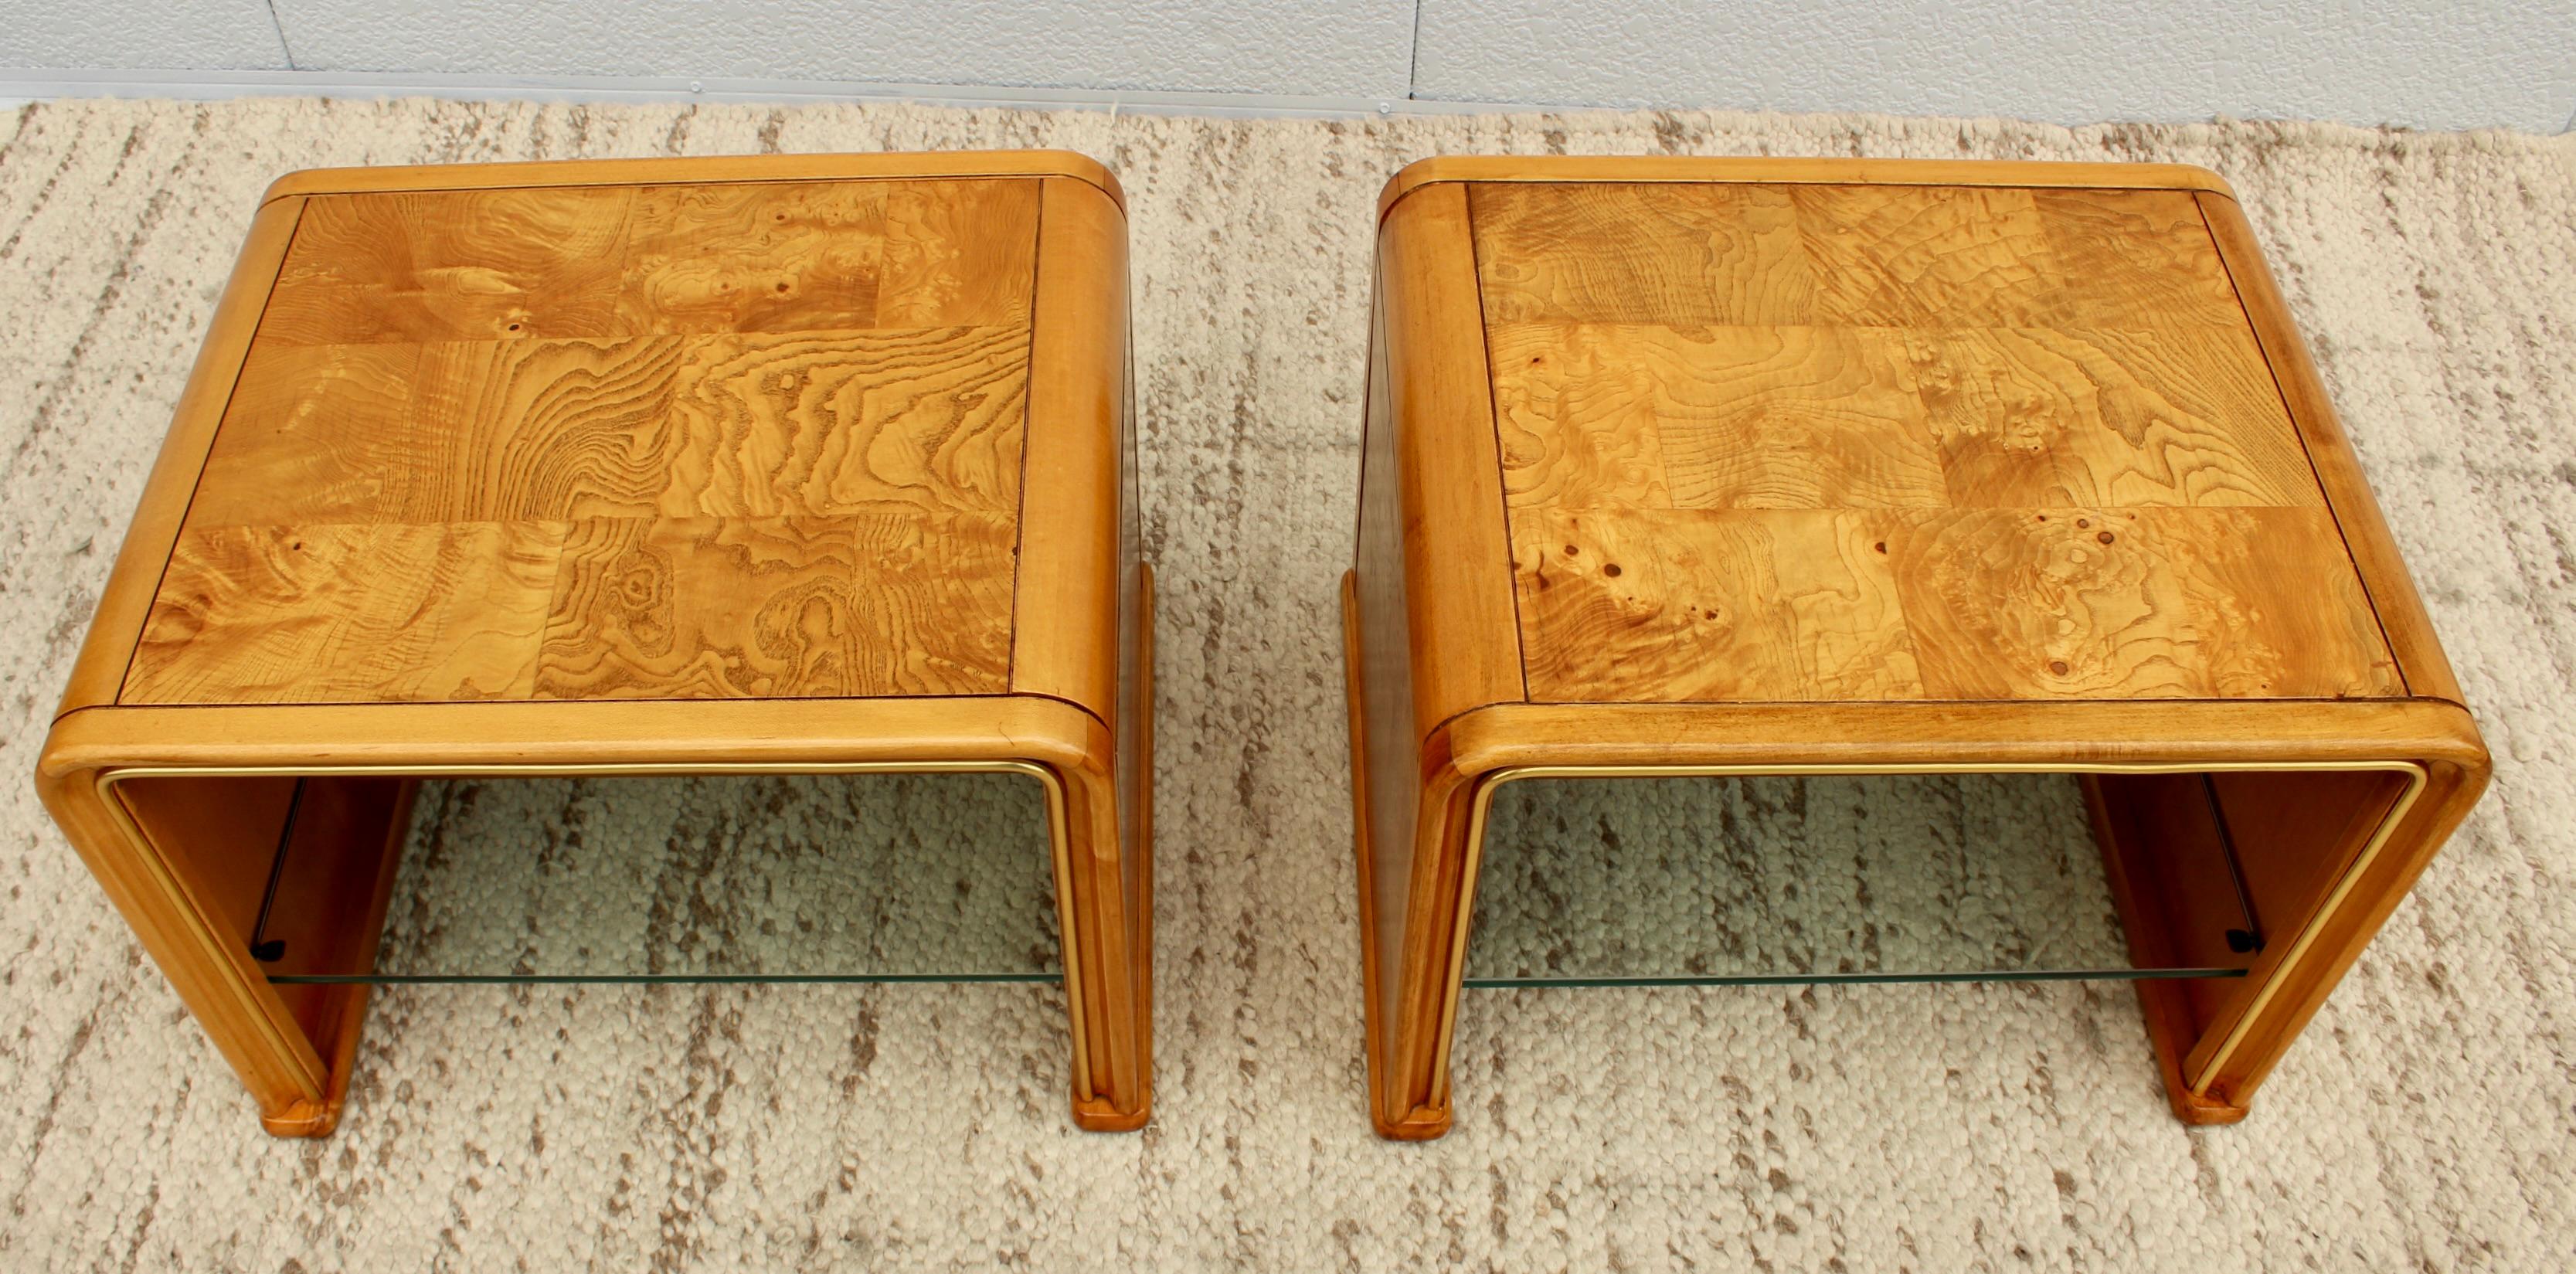 1970's Mid-Century Modern Burl-Wood Waterfall End Tables For Sale 1